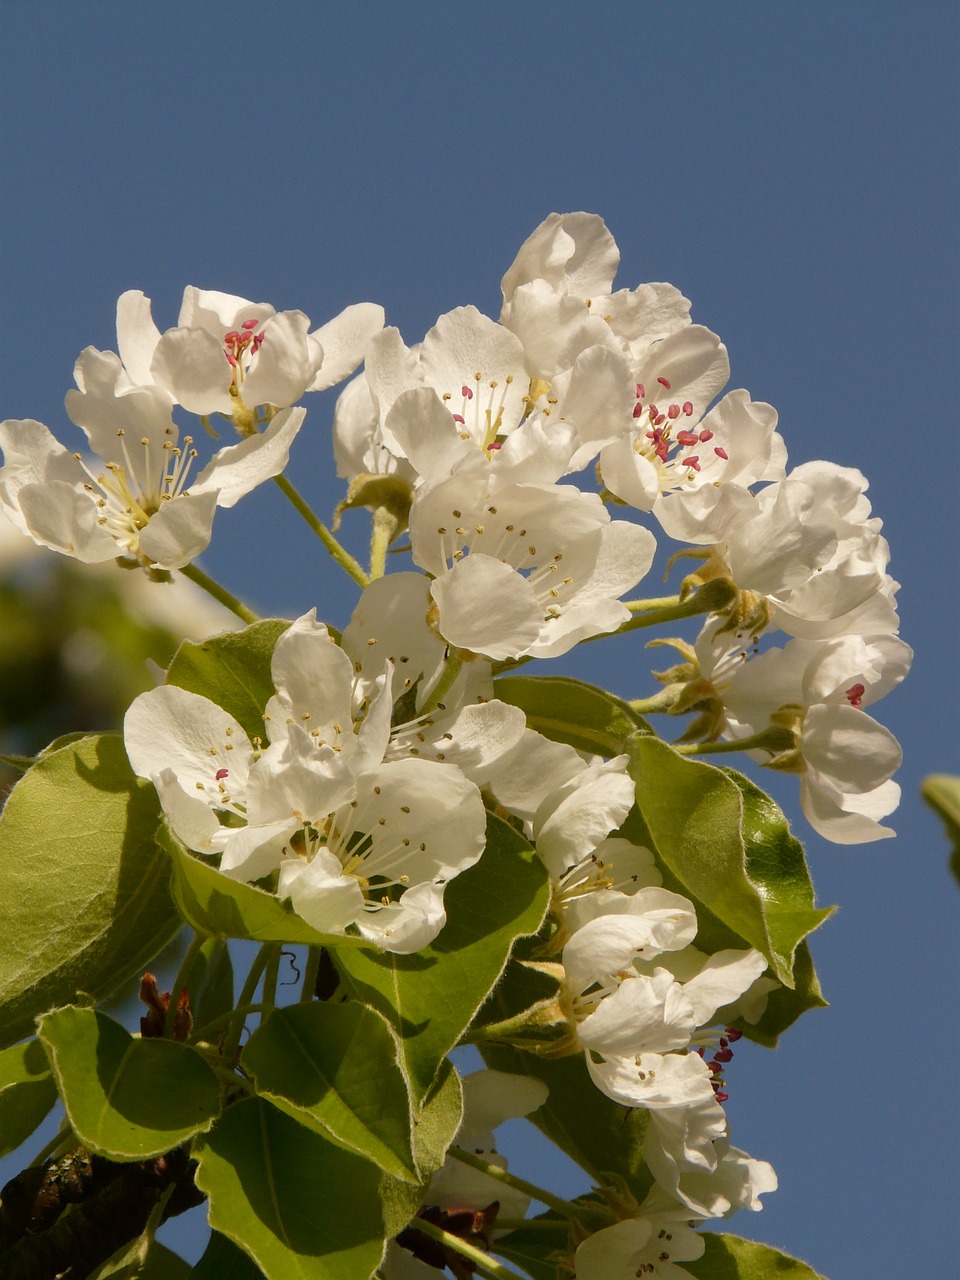 apple,apple blossom,apple tree,blossom,bloom,bloom,white,nature,spring,free pictures, free photos, free images, royalty free, free illustrations, public domain